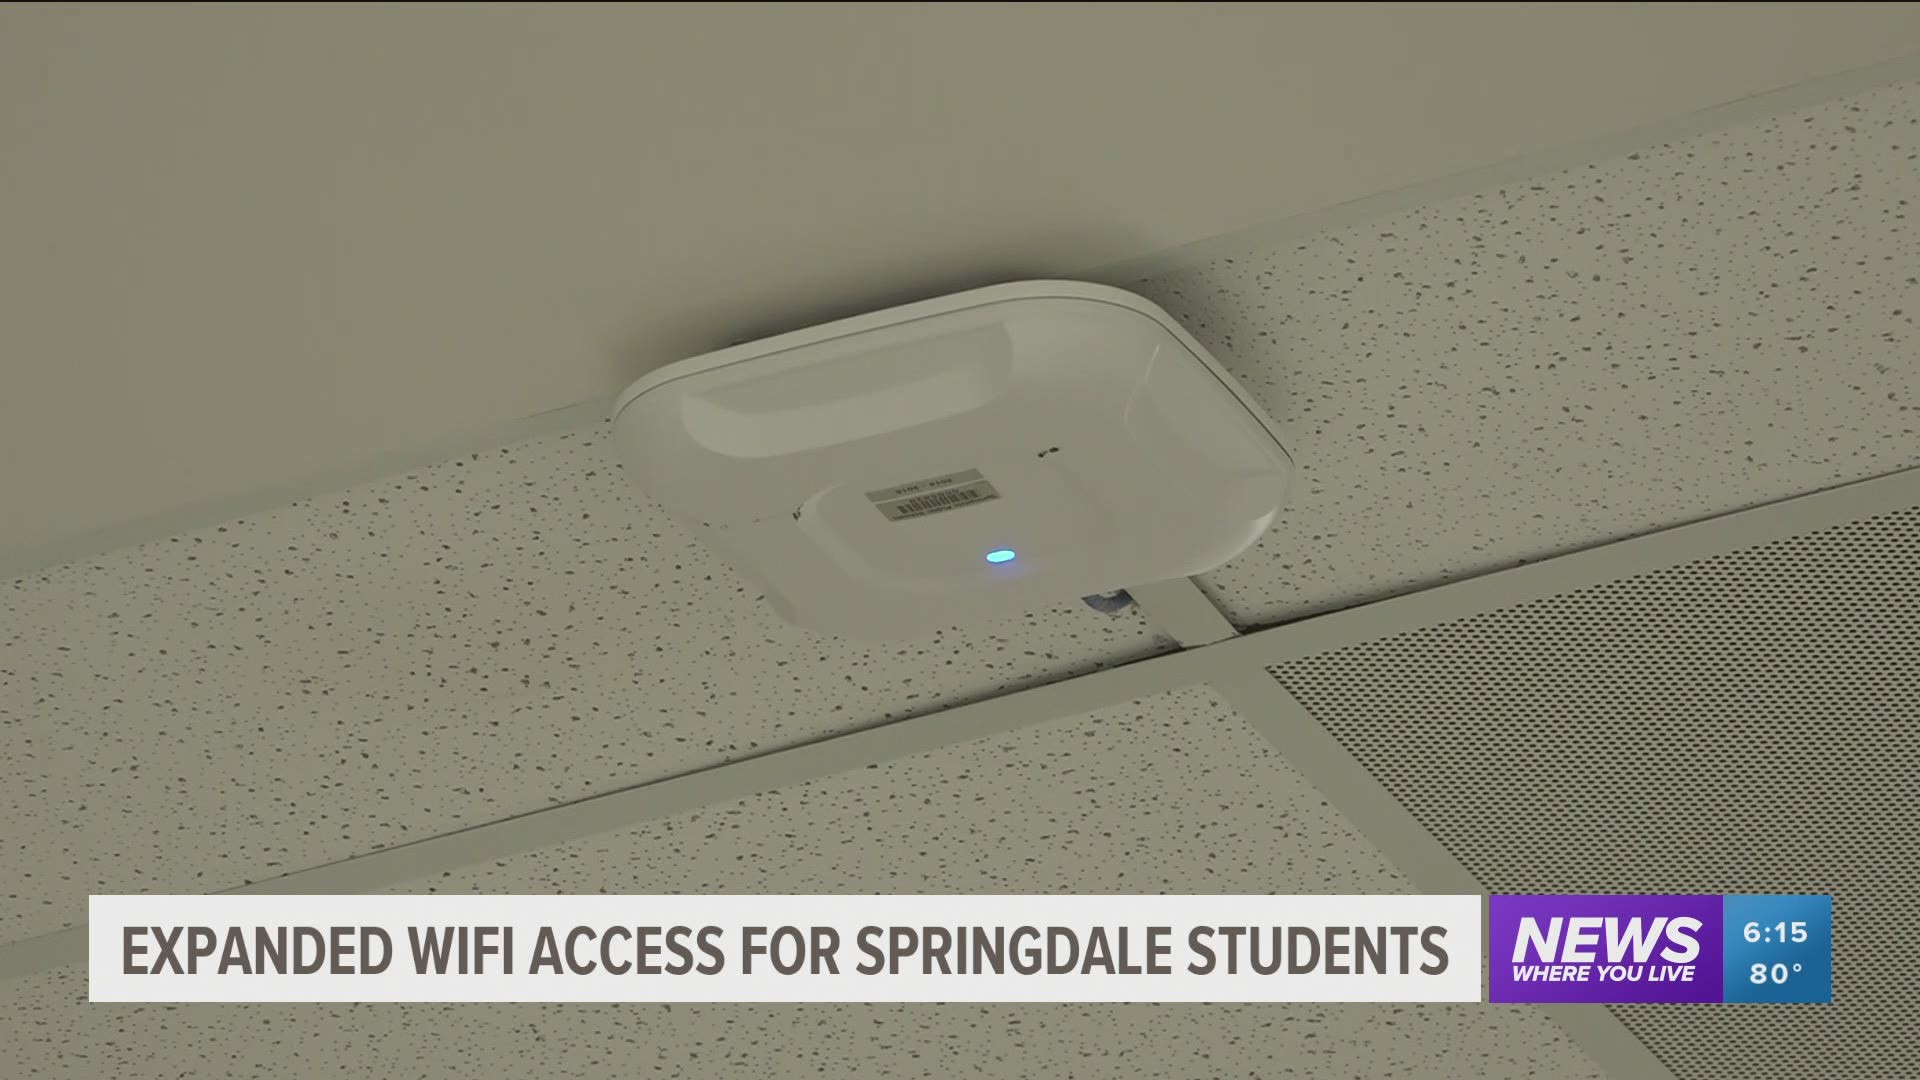 Springdale Schools are helping students during the COVID-19 pandemic.